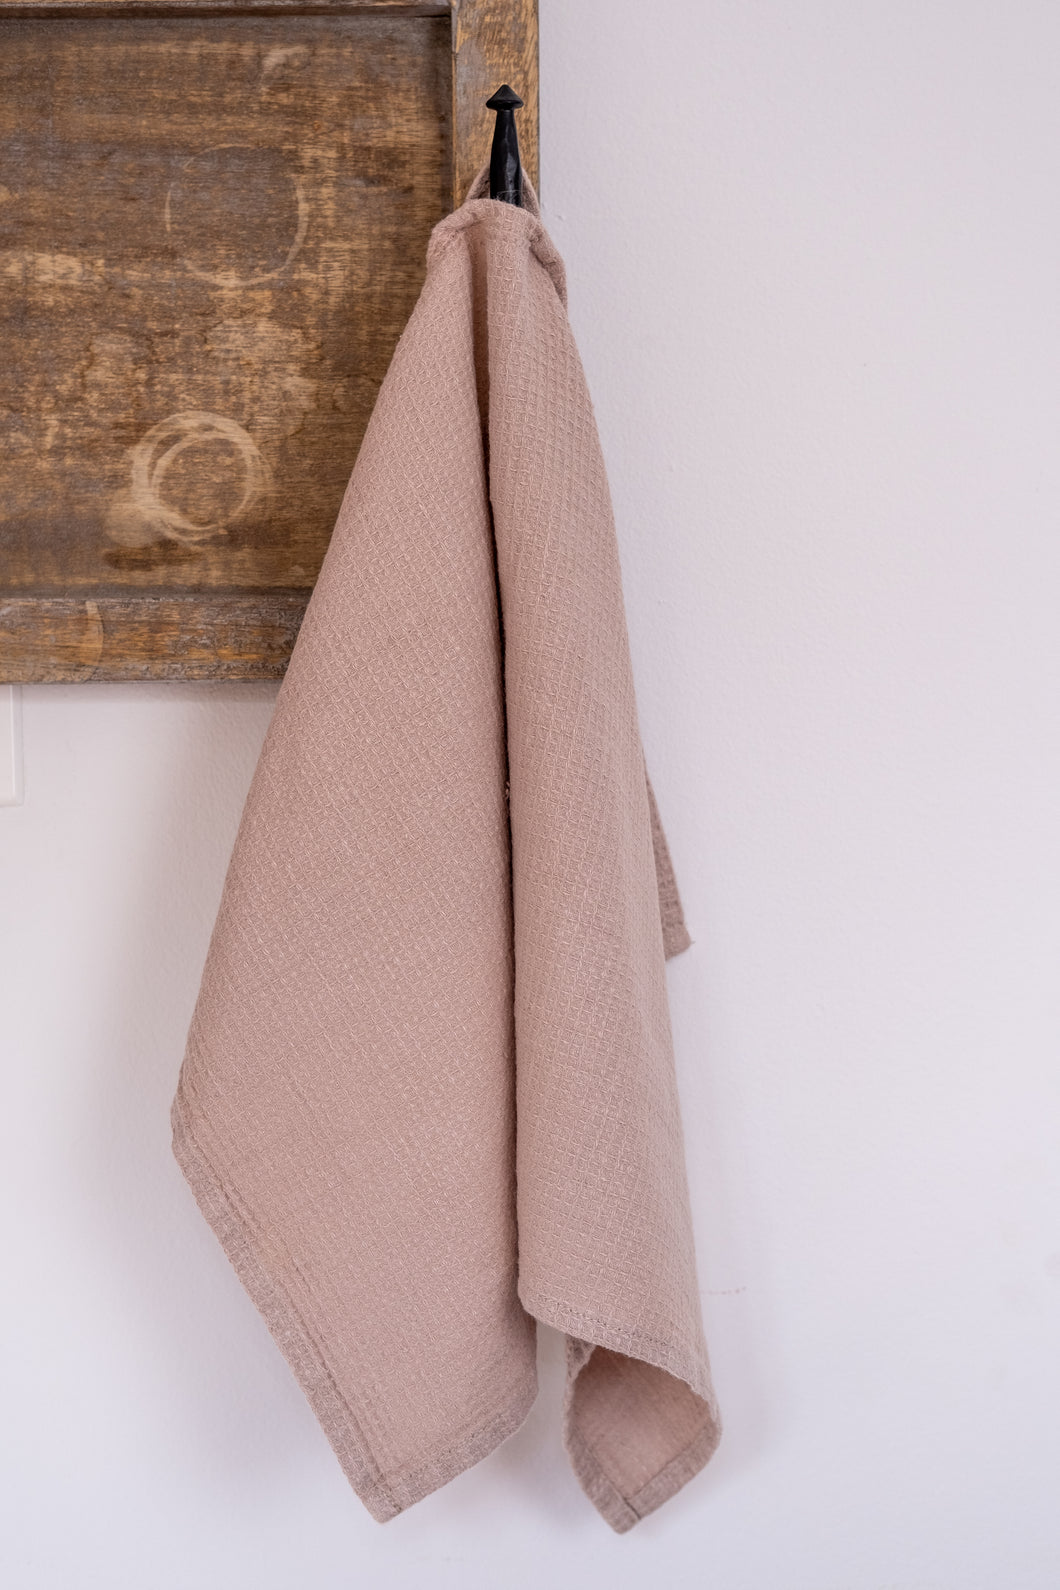 Linen Waffle Kitchen Towel in Taupe  - Set of 2